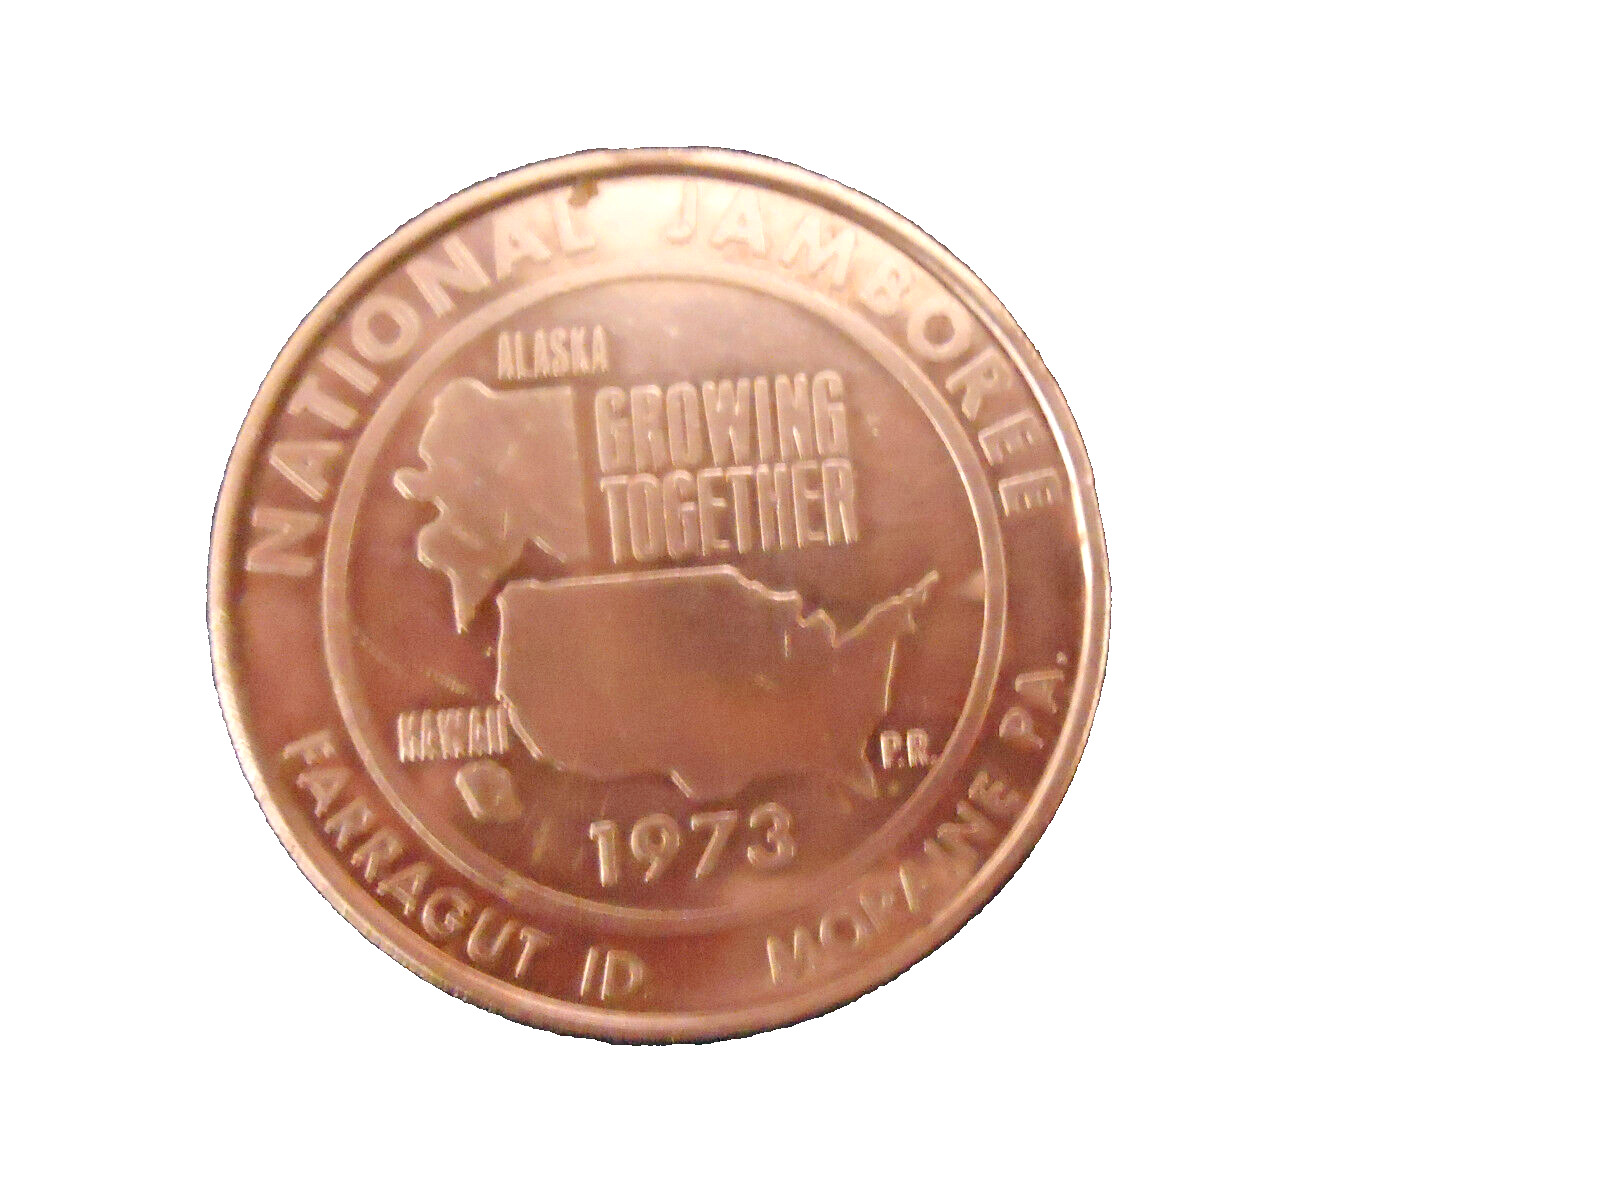 BOY SCOUTS - 1973 NATIONAL JAMBOREE- GROWING TOGETHER  TOKEN IN AIR TIGHT HOLDER